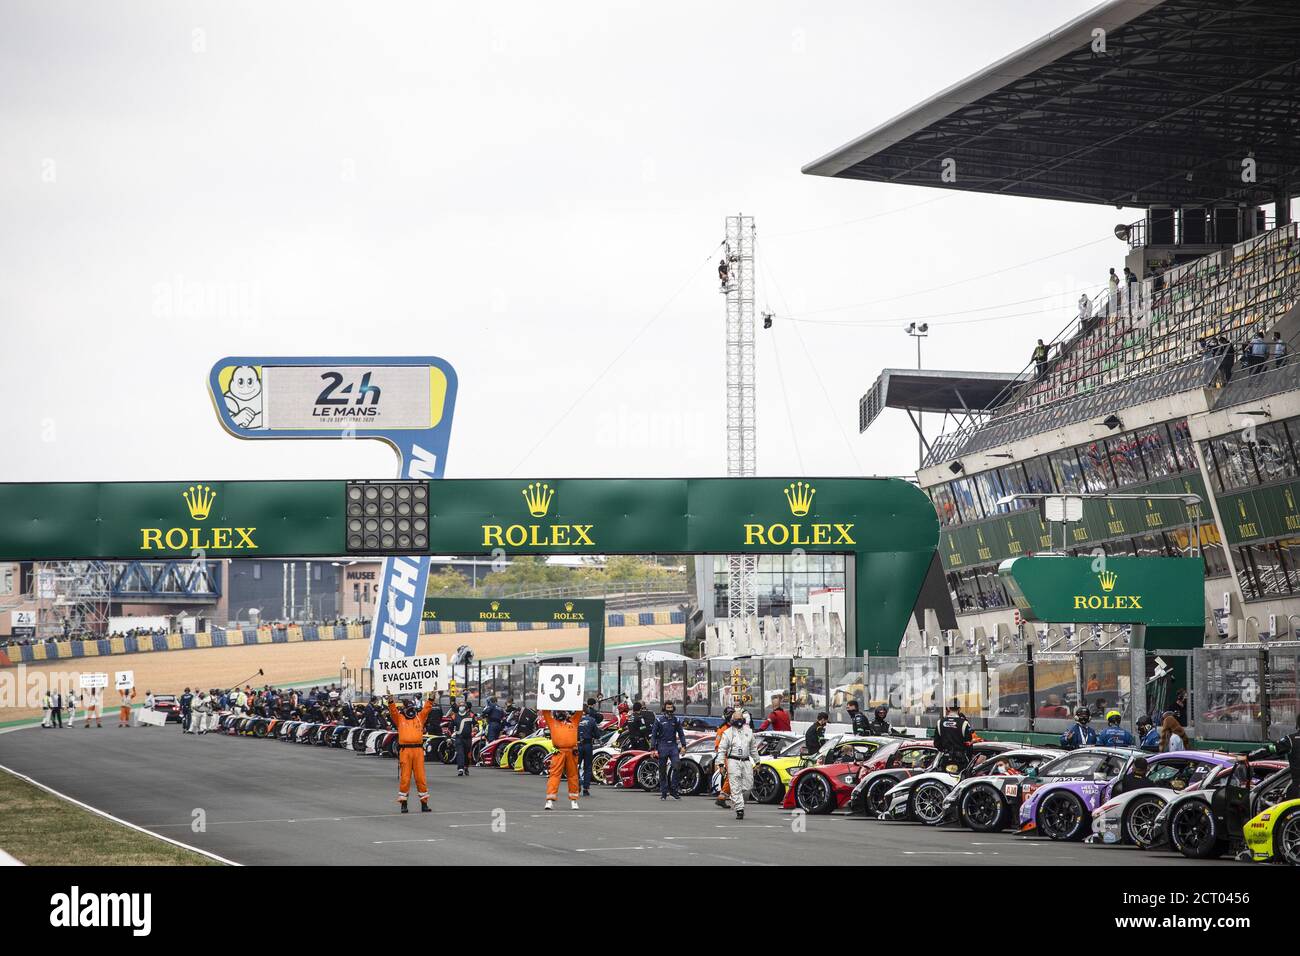 starting grid, grille de depart, during the 2020 24 Hours of Le Mans, 7th round of the 2019-20 FIA World Endurance Championship on the Circuit des 24 Stock Photo